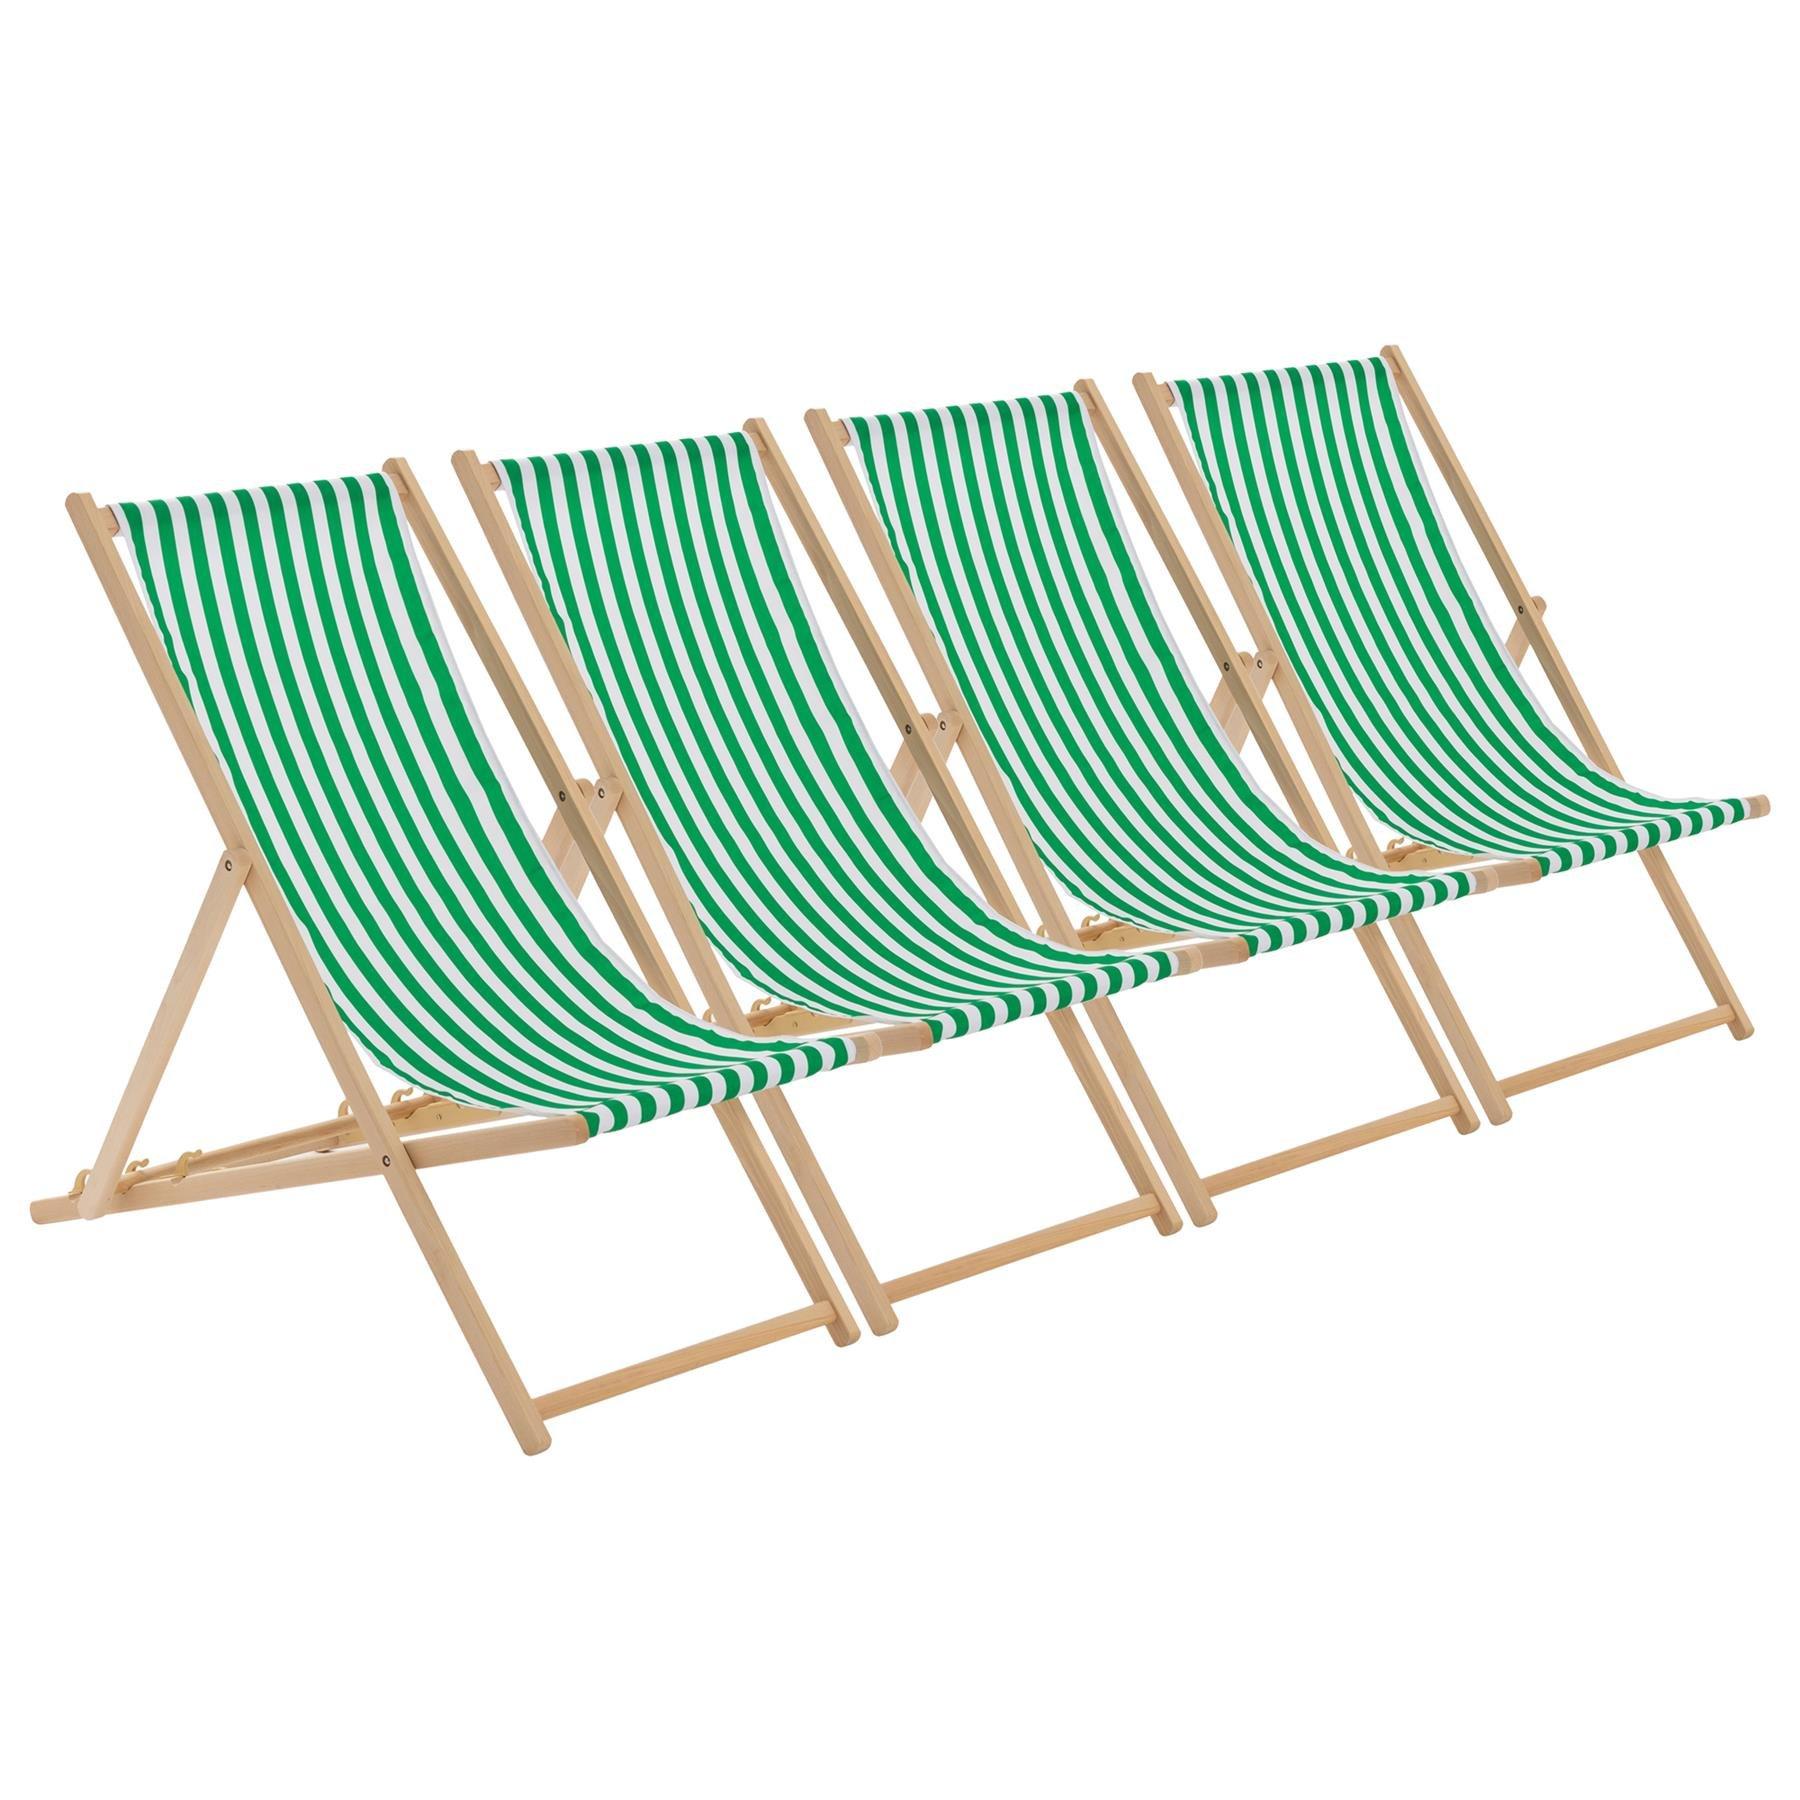 Folding Wooden Deck Chairs Green Stripe Pack of 4